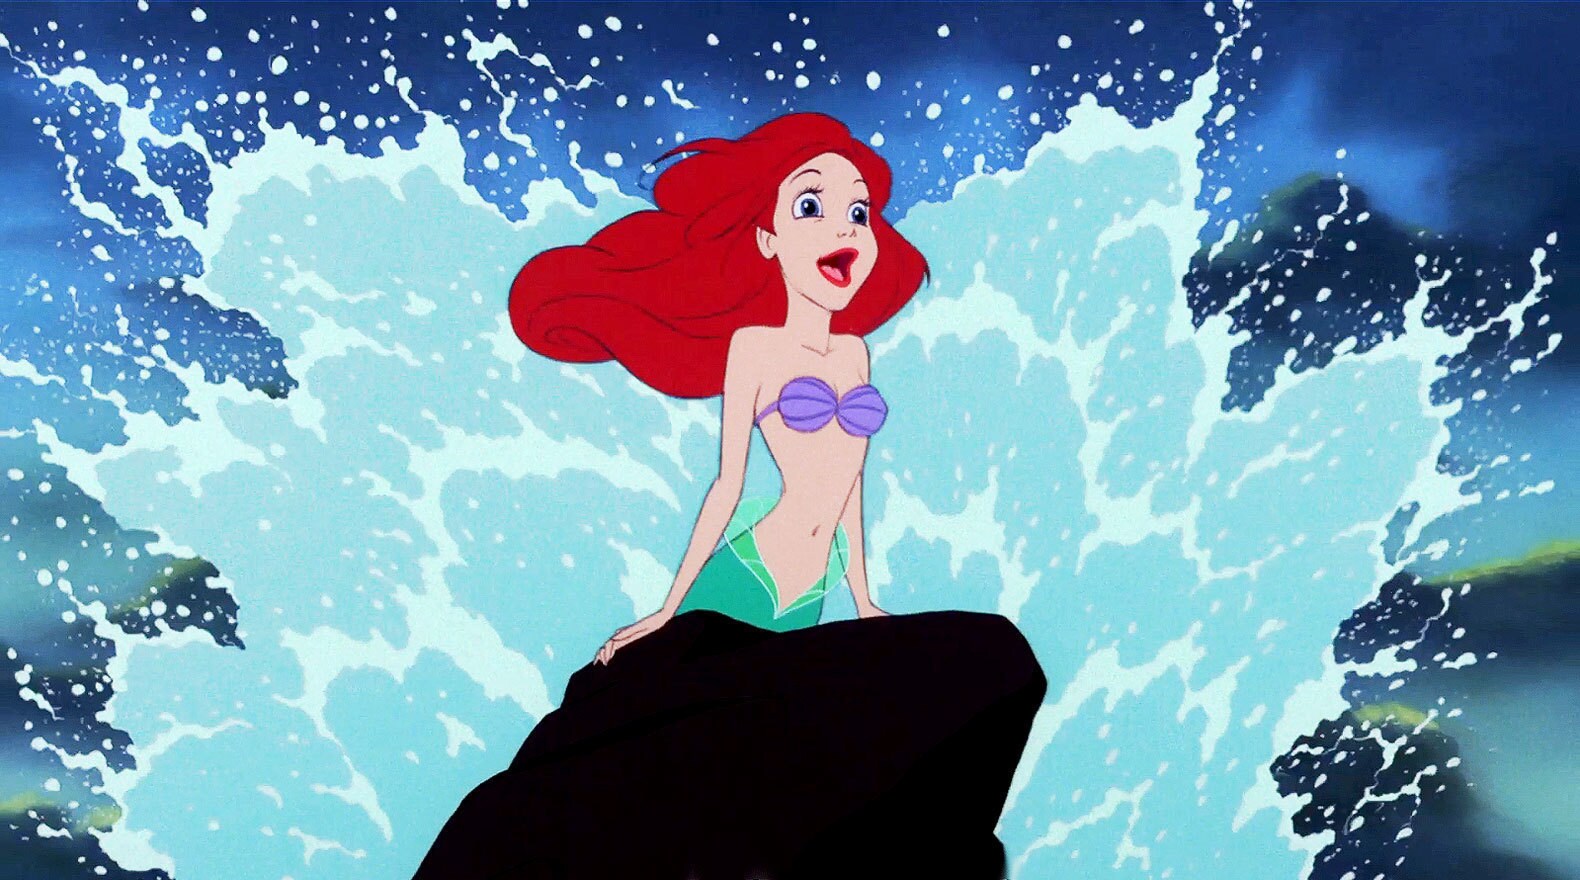 “Out of the sea, wish I could be, part of that world!”